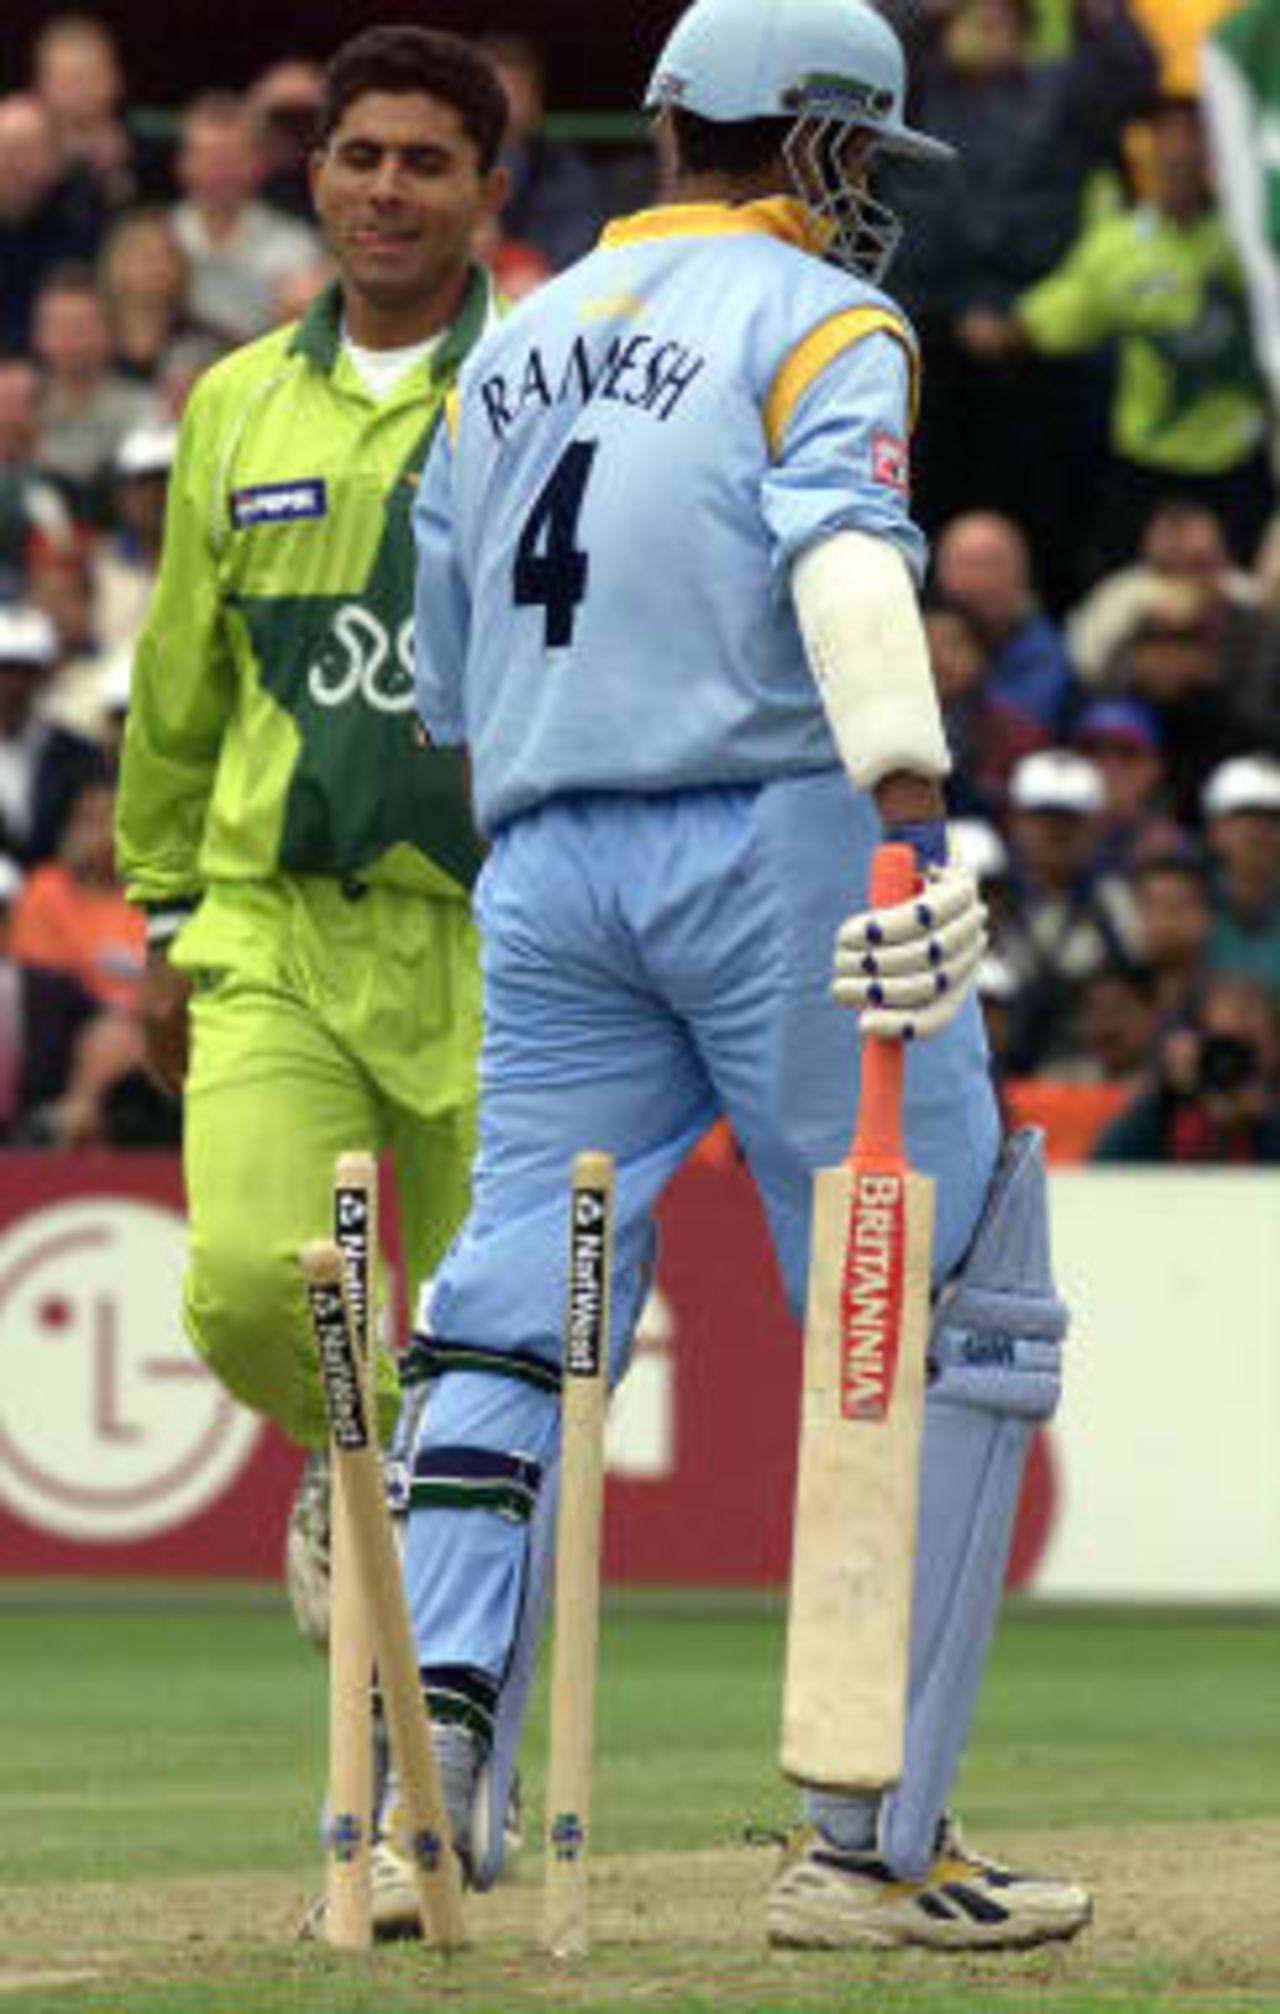 Pakistan`s Abdul Razzaq takes the wicket of Sadagopan Ramesh of India  bowled for 20 at Old Trafford 08 June 1999, during the super six match of the Cricket World Cup match in Manchester